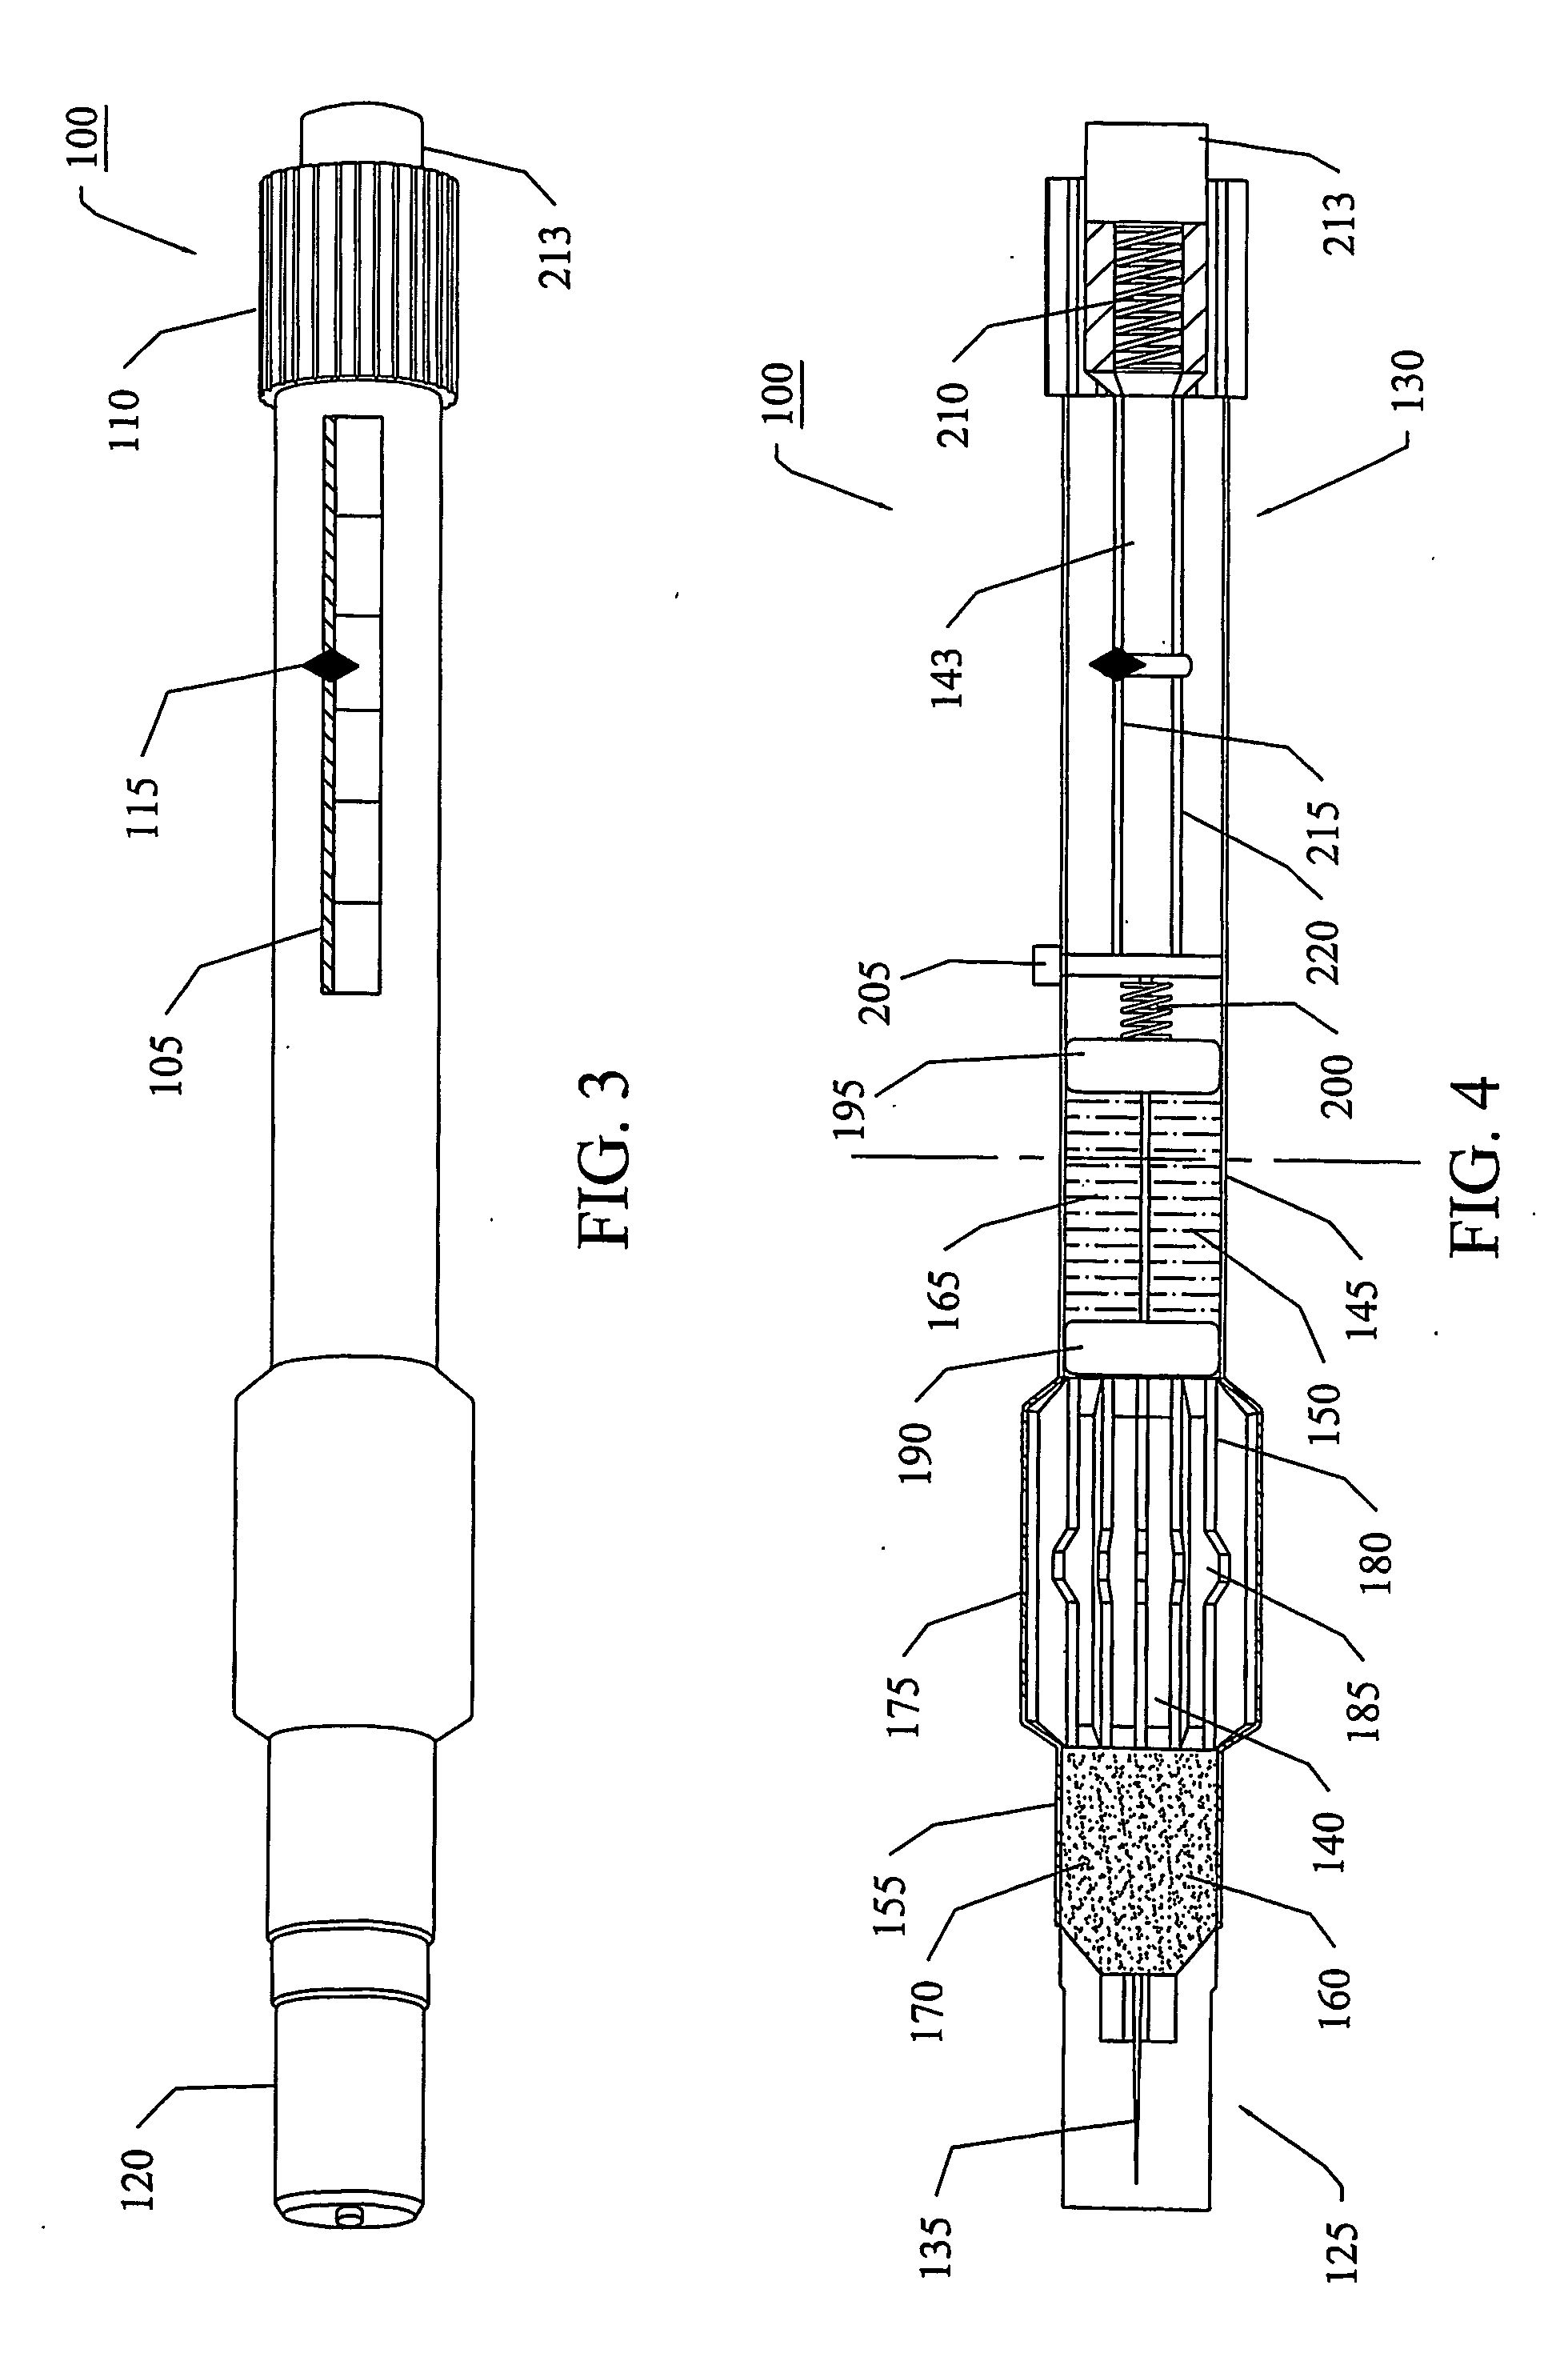 Auto-injection devices and methods for intramuscular administration of medications